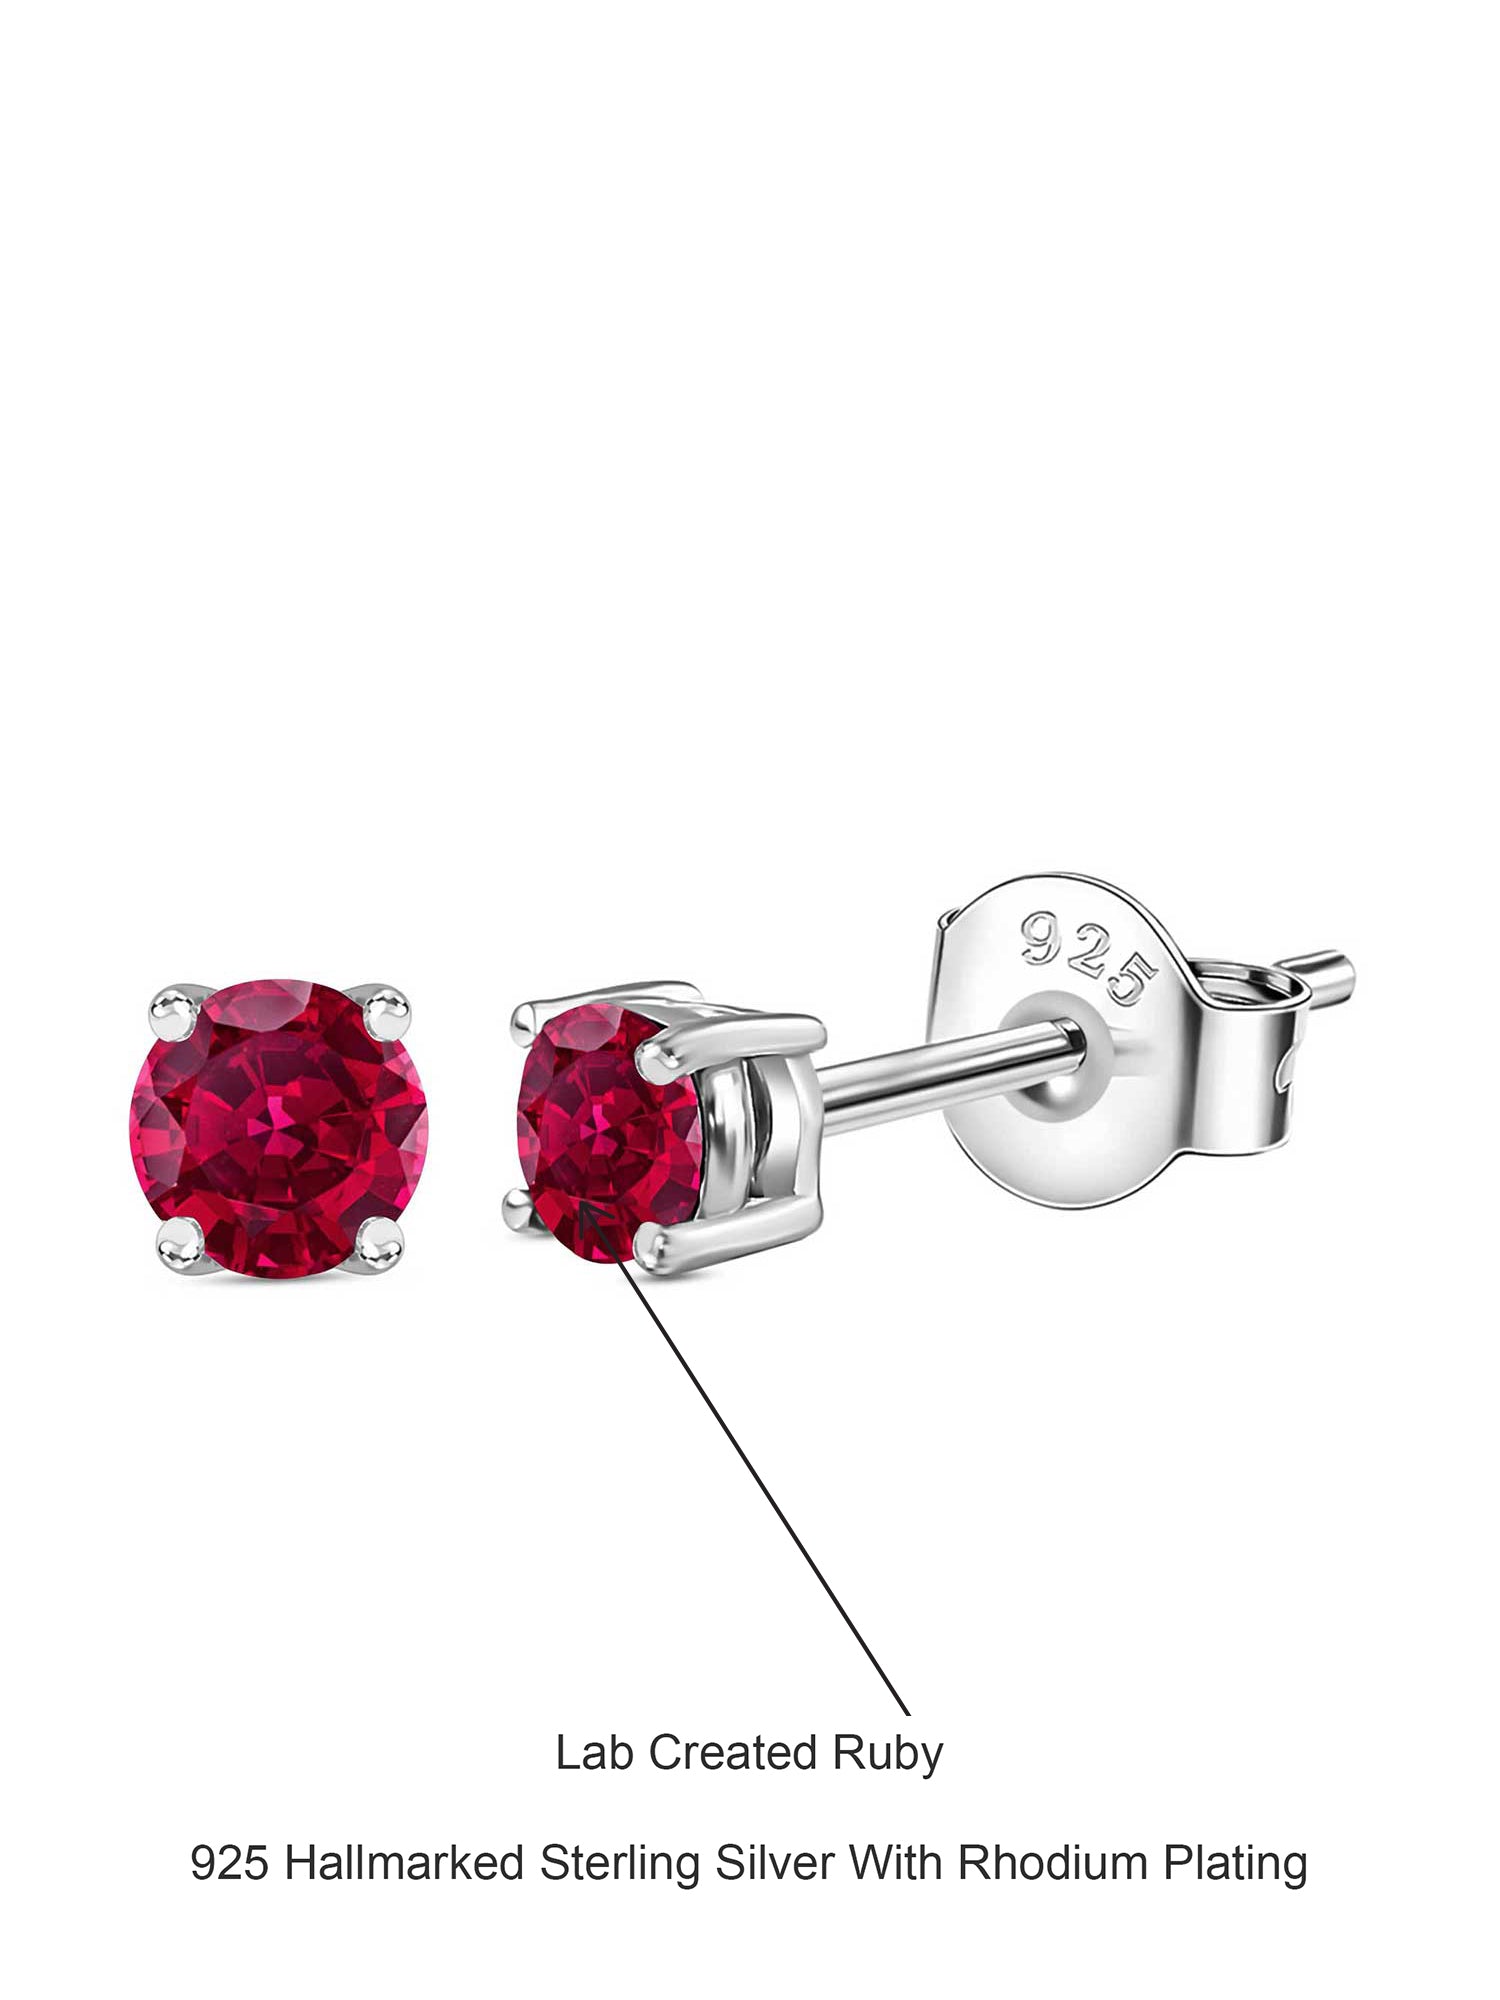 Red Ruby Half Carat Solitaire Stud Earrings For Women-6